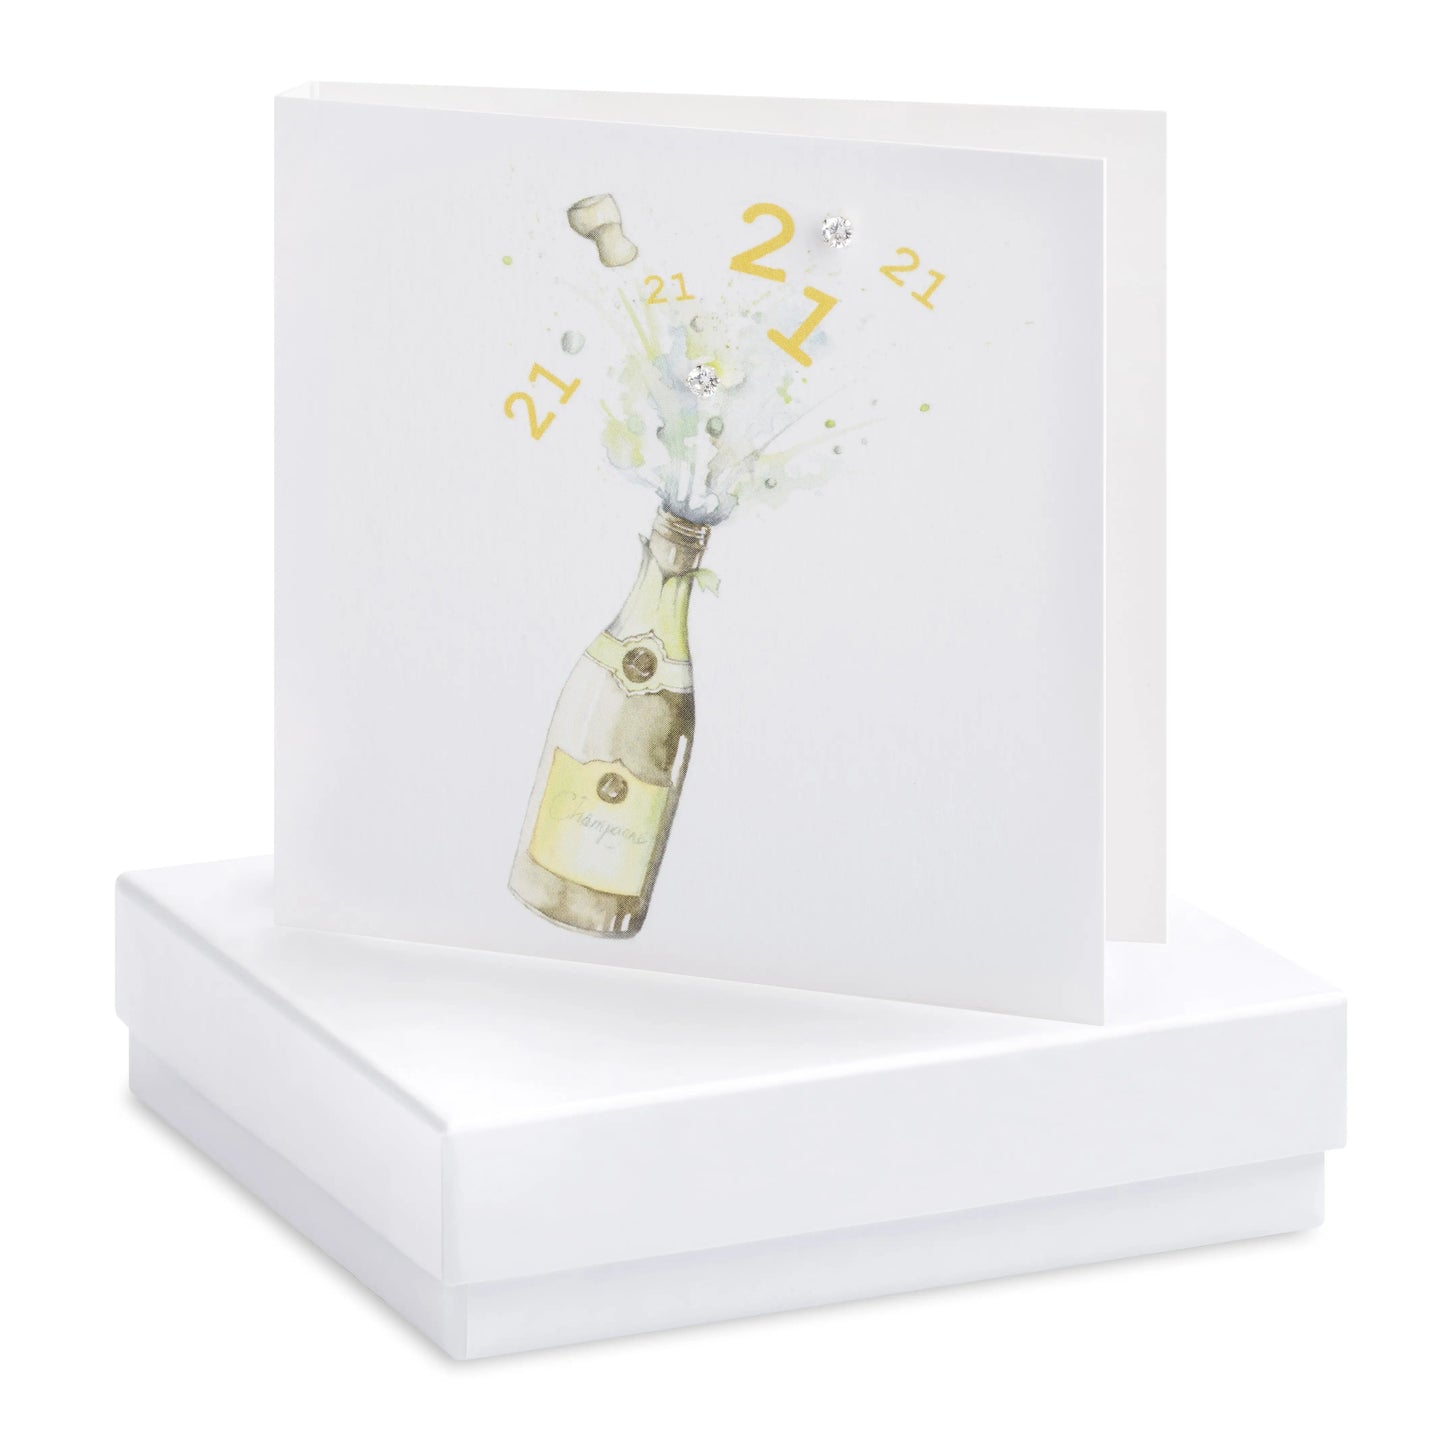 Boxed Champagne Bottle 21st Earring Card Earrings Crumble and Core White  